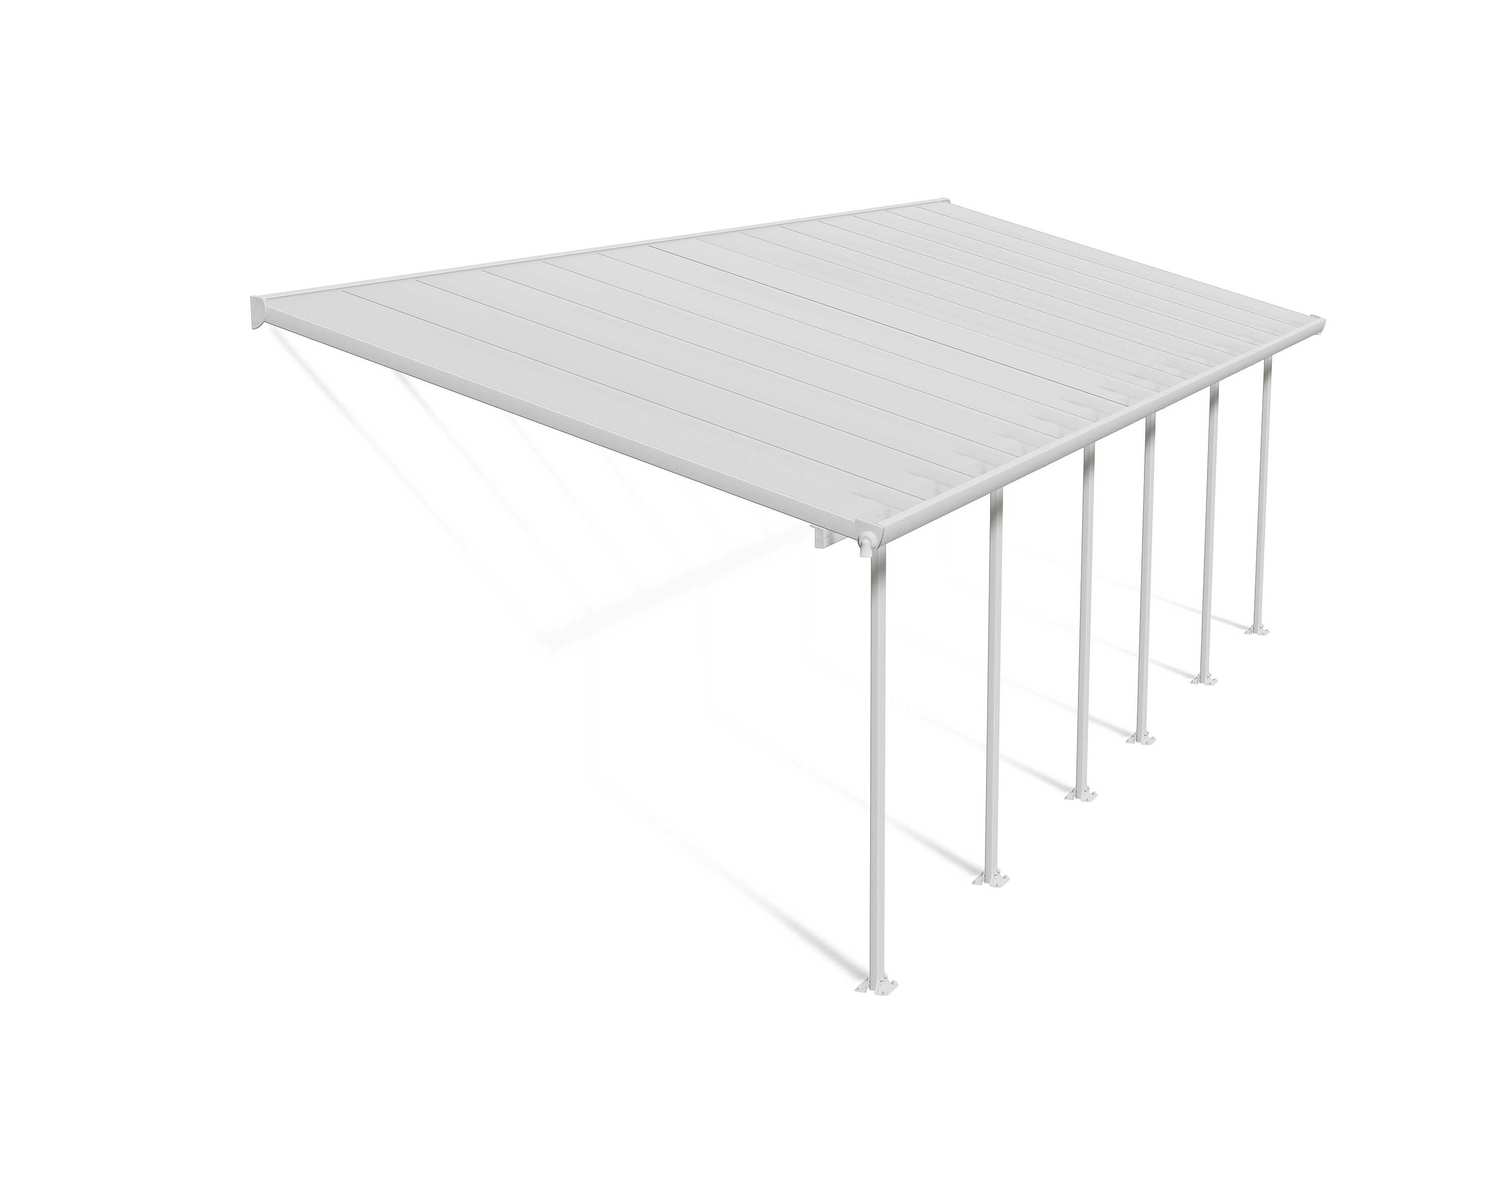 Patio Cover Kit Feria 3 ft. x 8.50 ft. White Structure & Clear Multi Wall Glazing